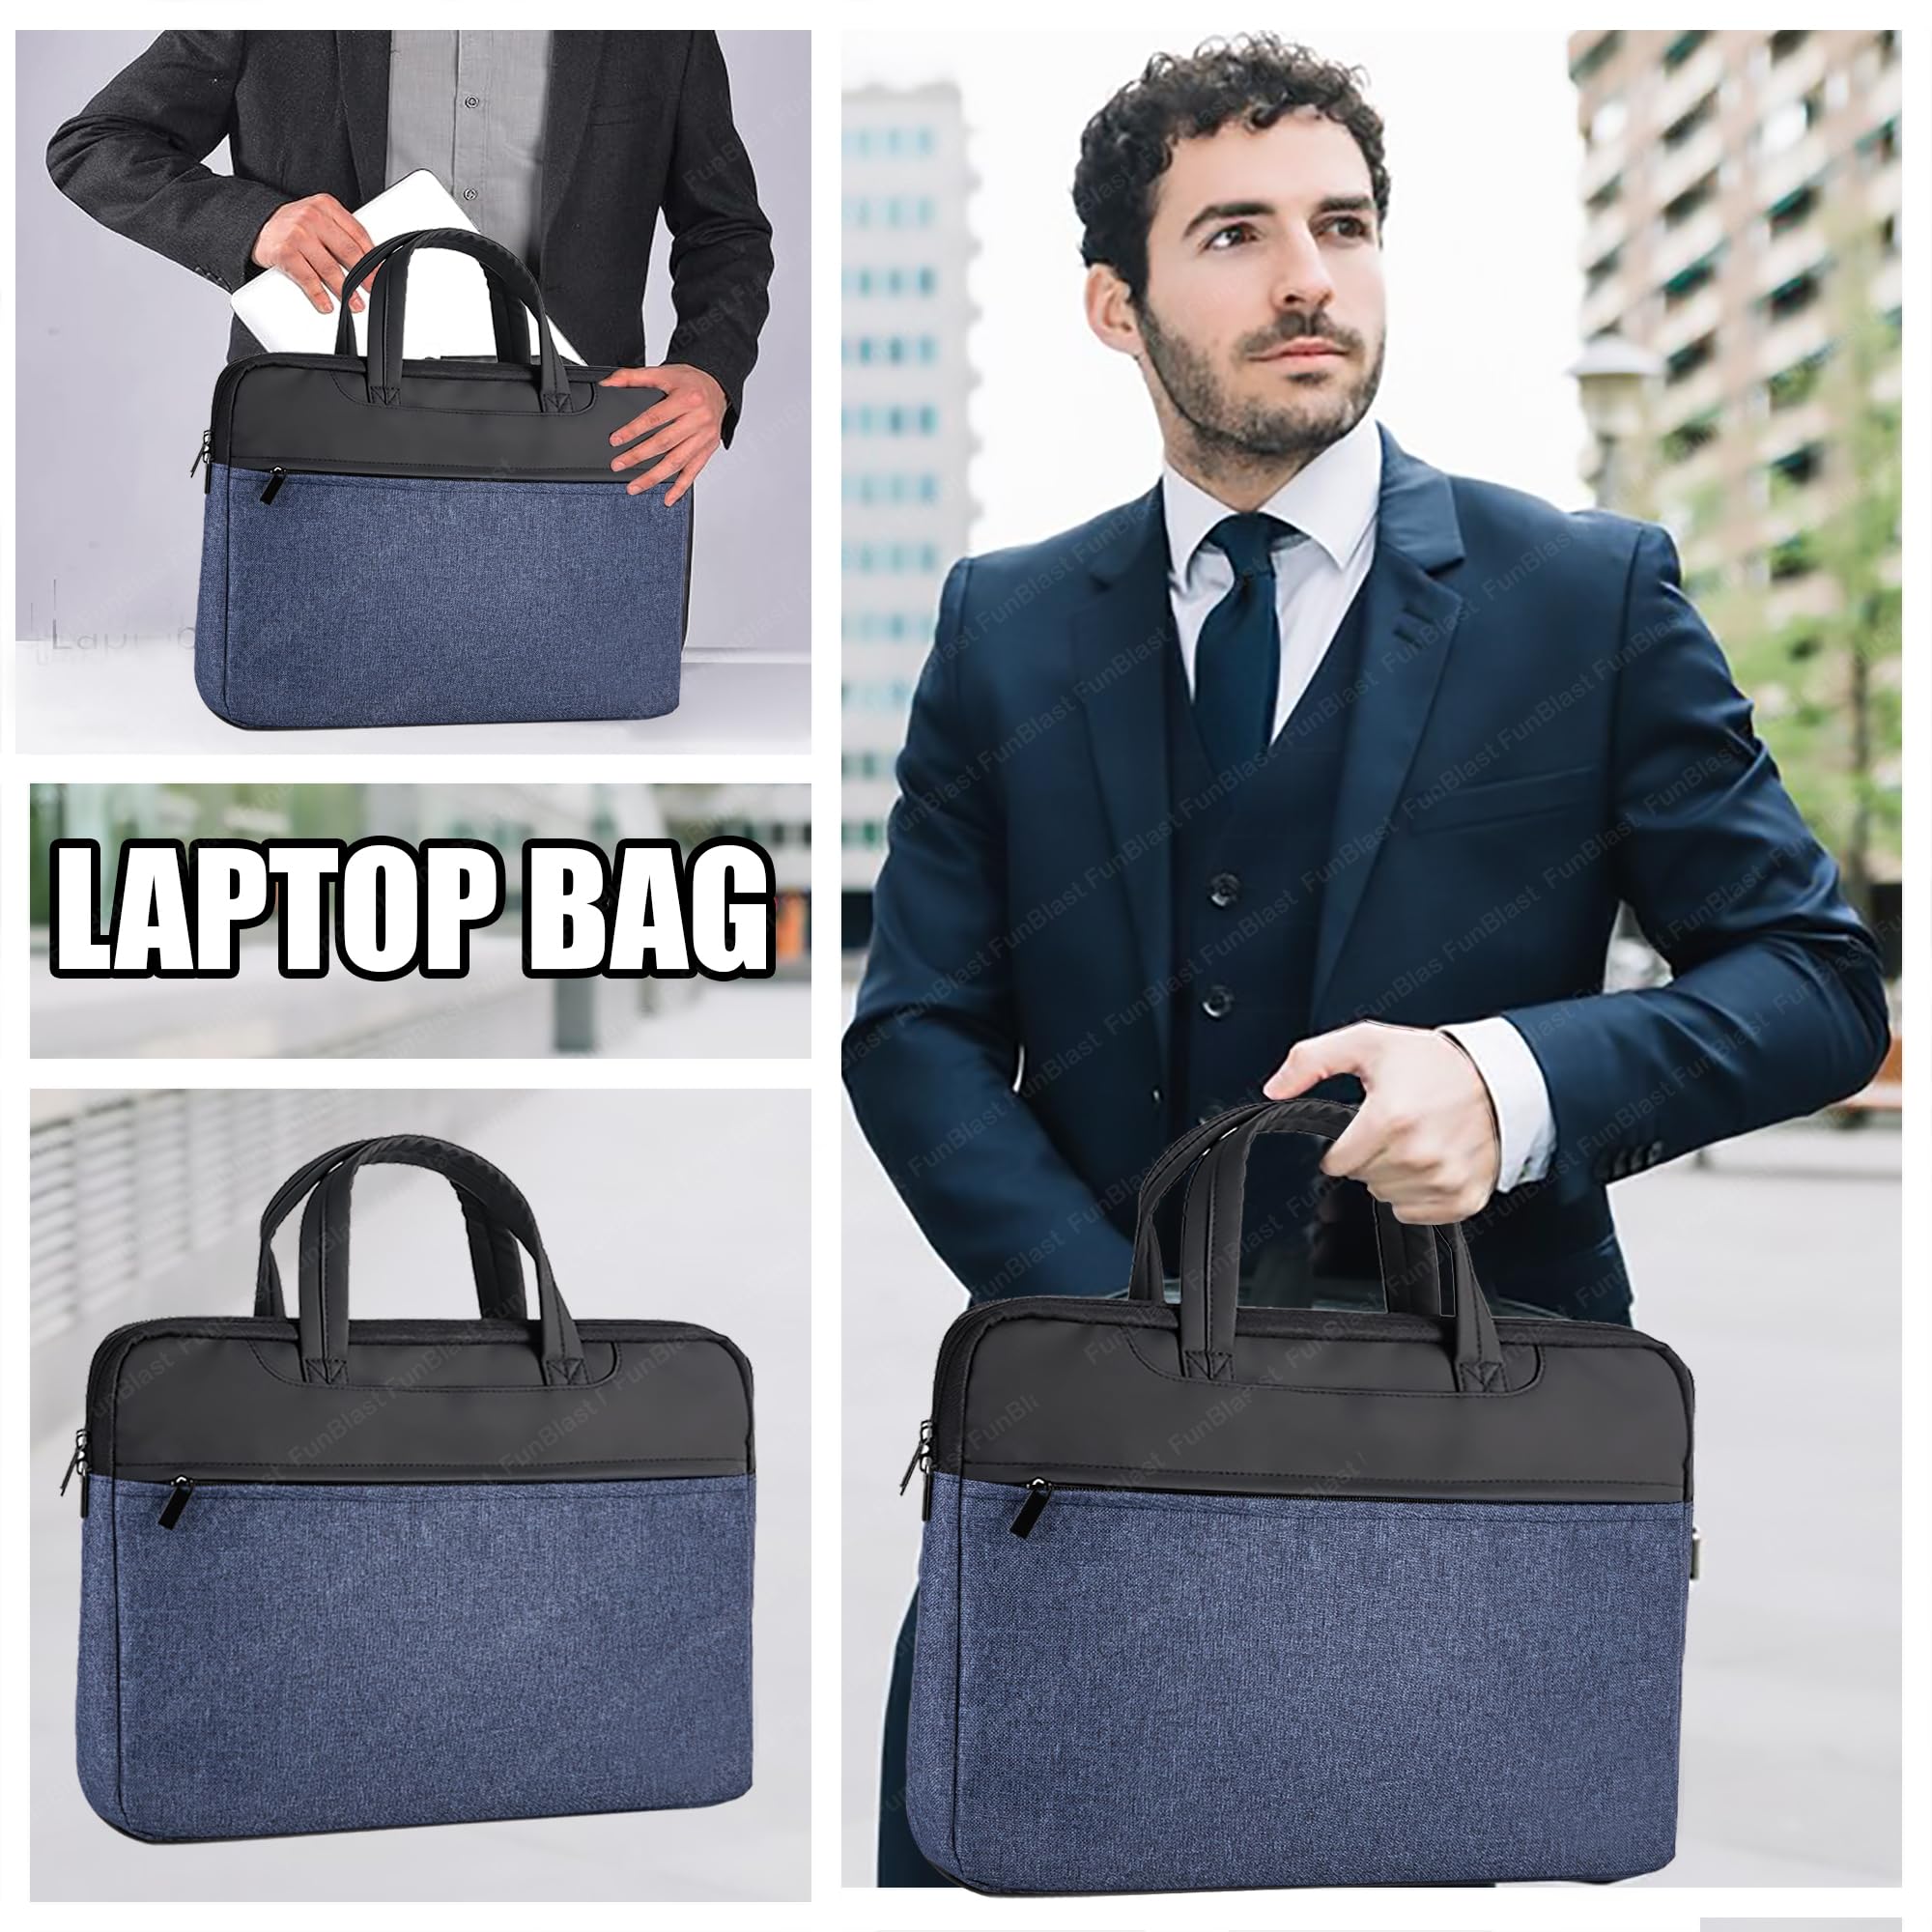 Laptop Bag with Hand Strap – Note Book Bag, Laptop Carry Bag, Multipurpose Messenger Bag for Men, Women and College Students